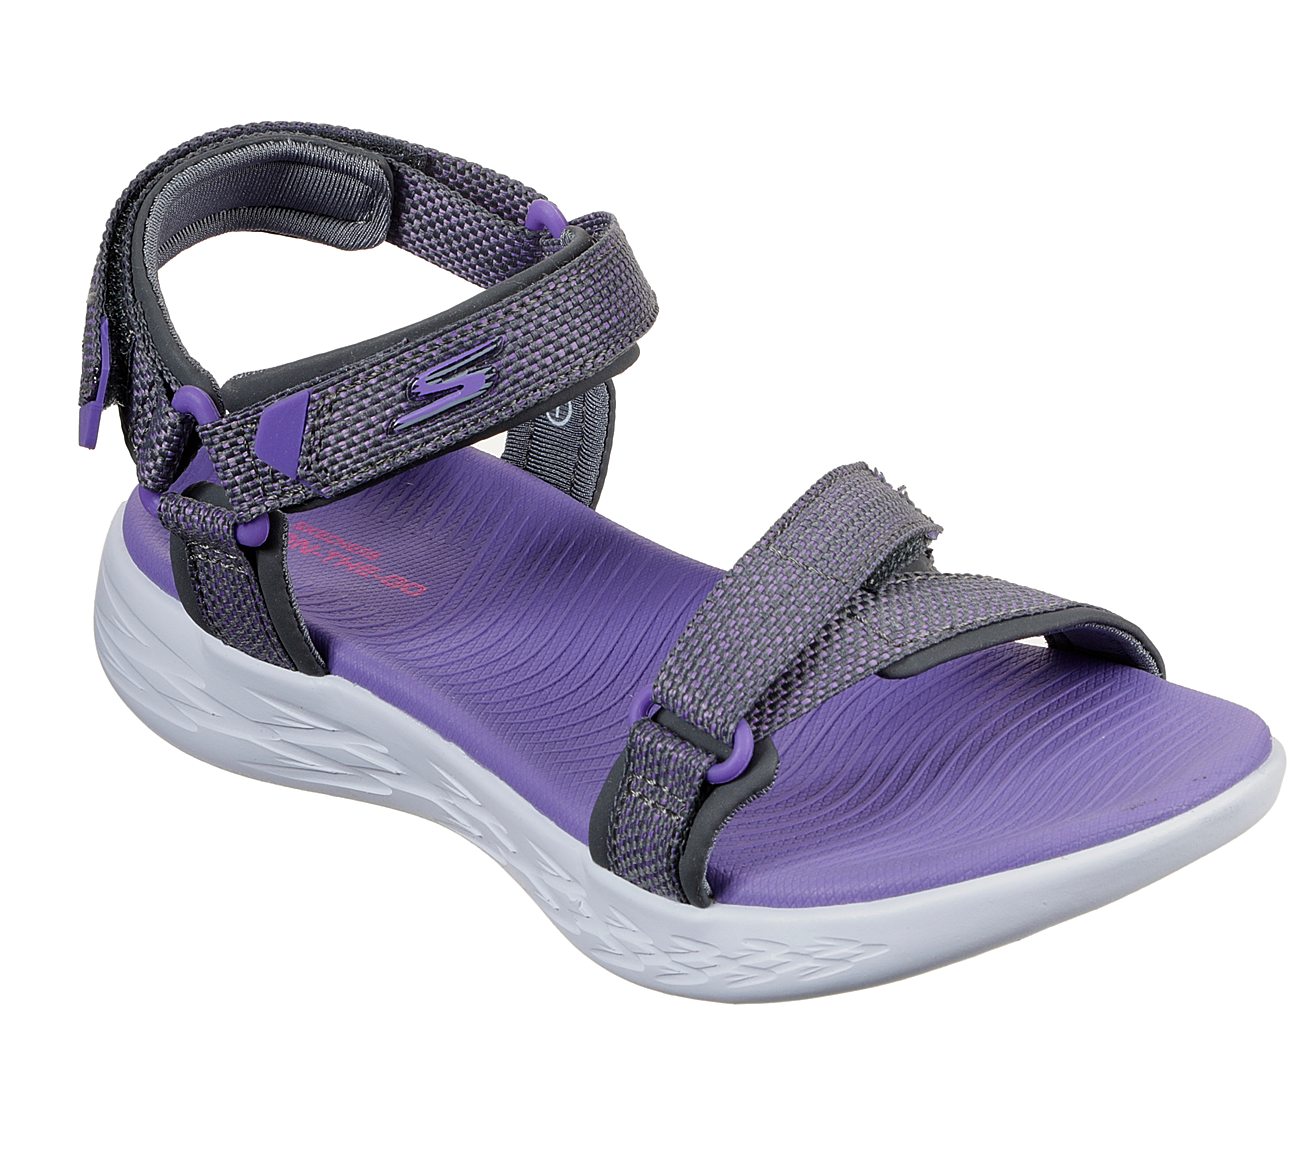 skechers on the go sandals radiance